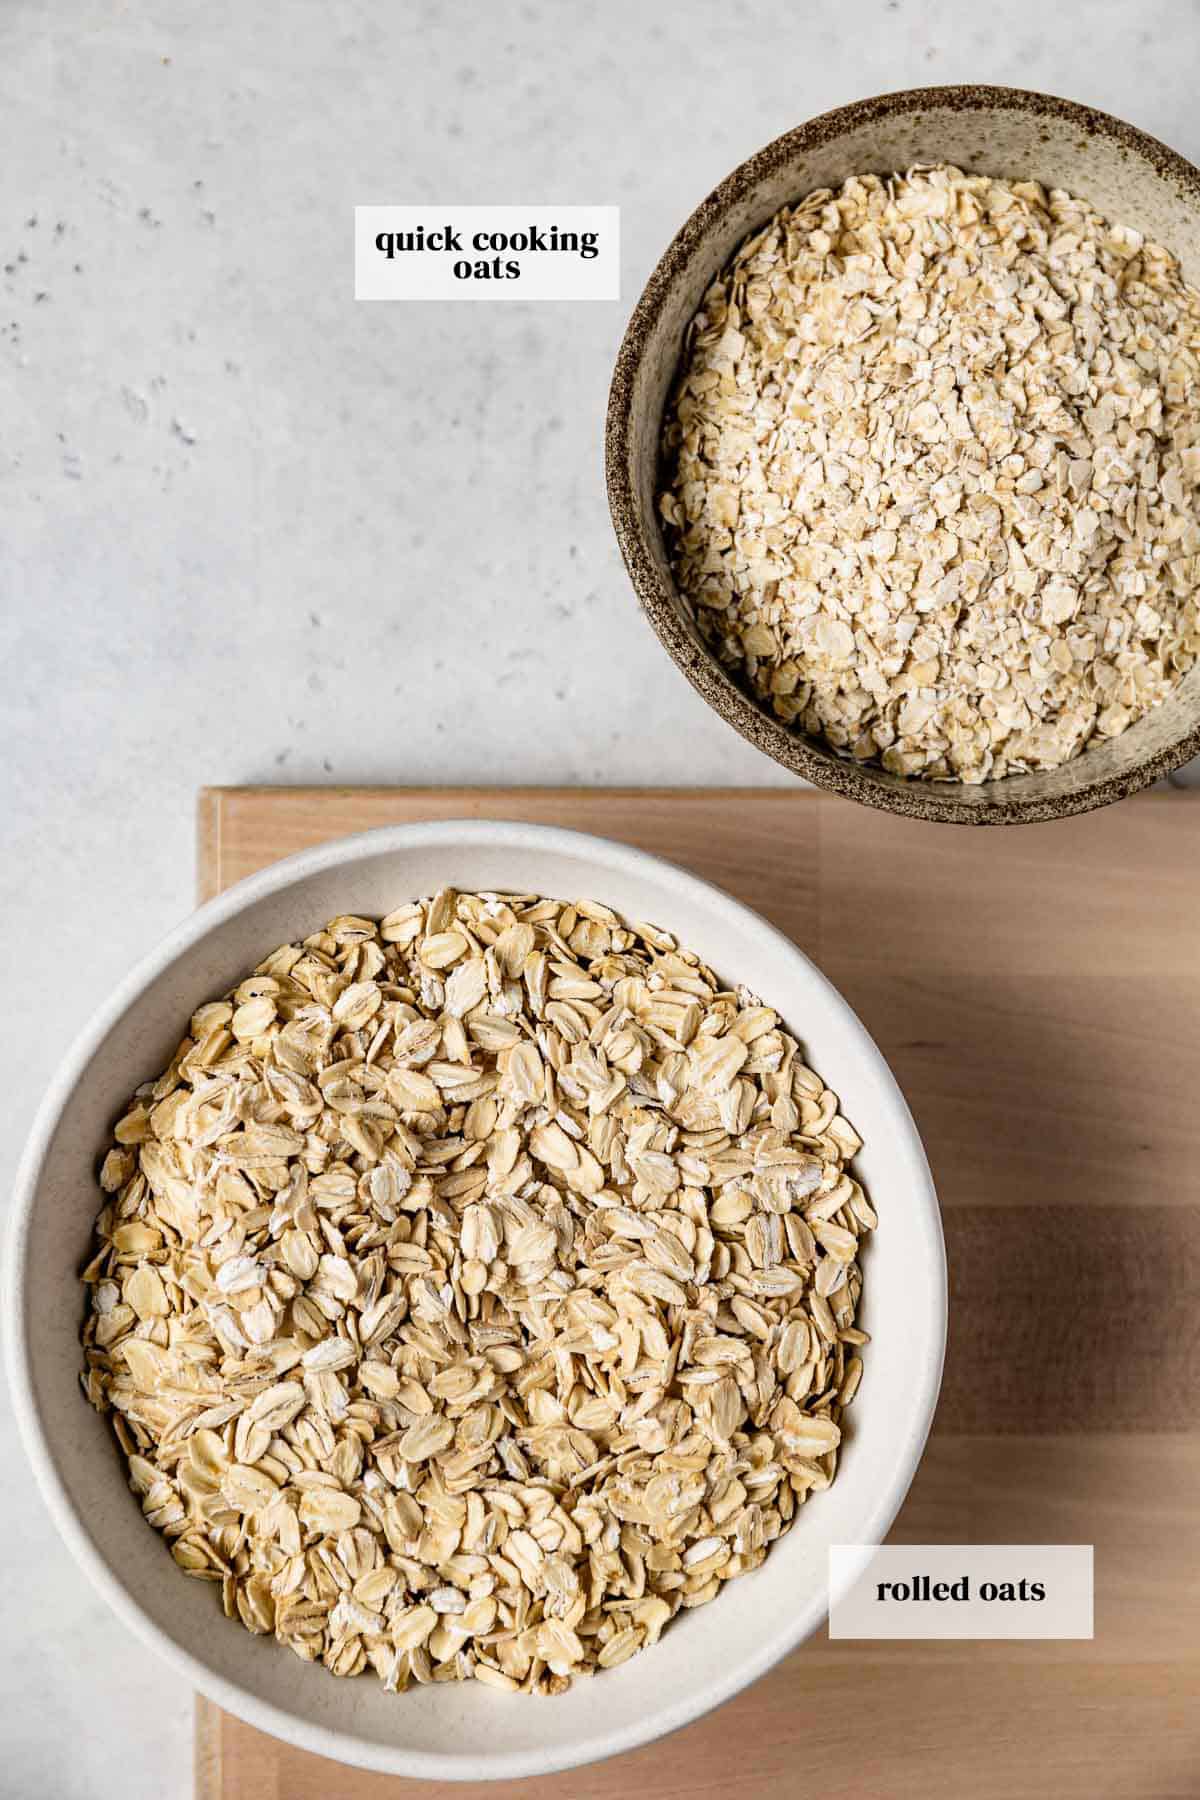 Old fashioned oats and quick oats in small bowls with text on the image.